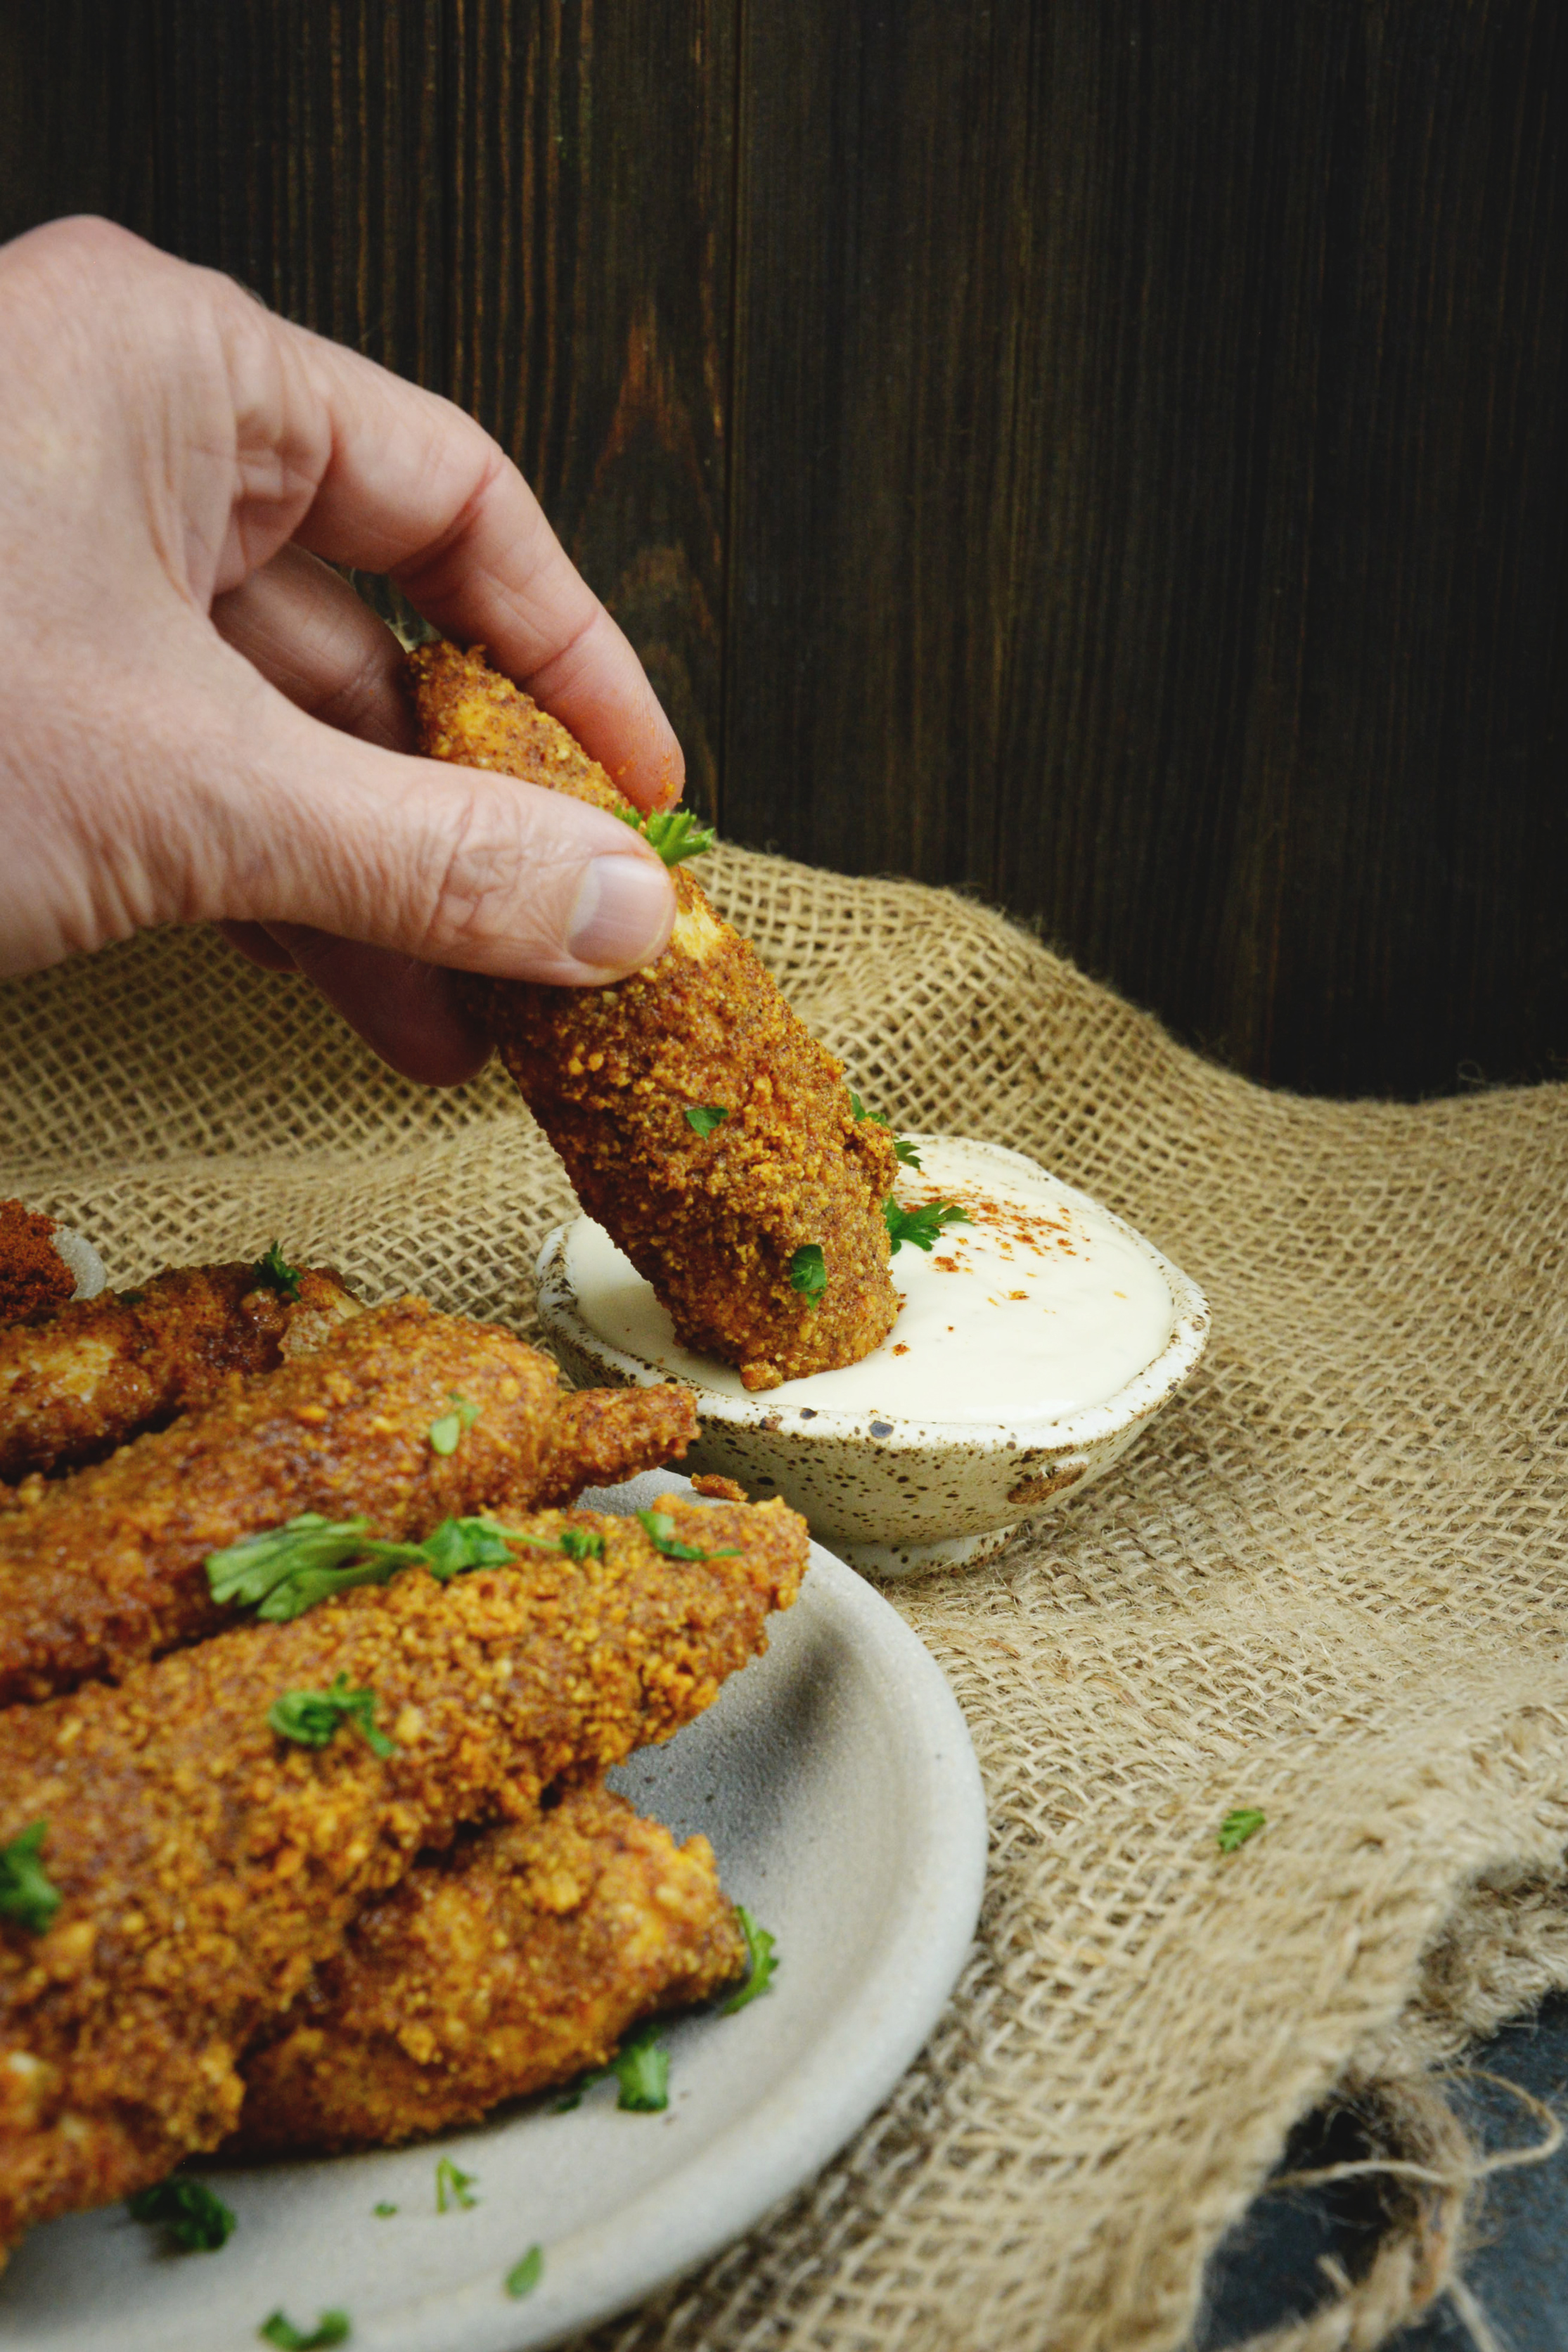  Low-Carb Buffalo Chicken Tenders-Dipping one